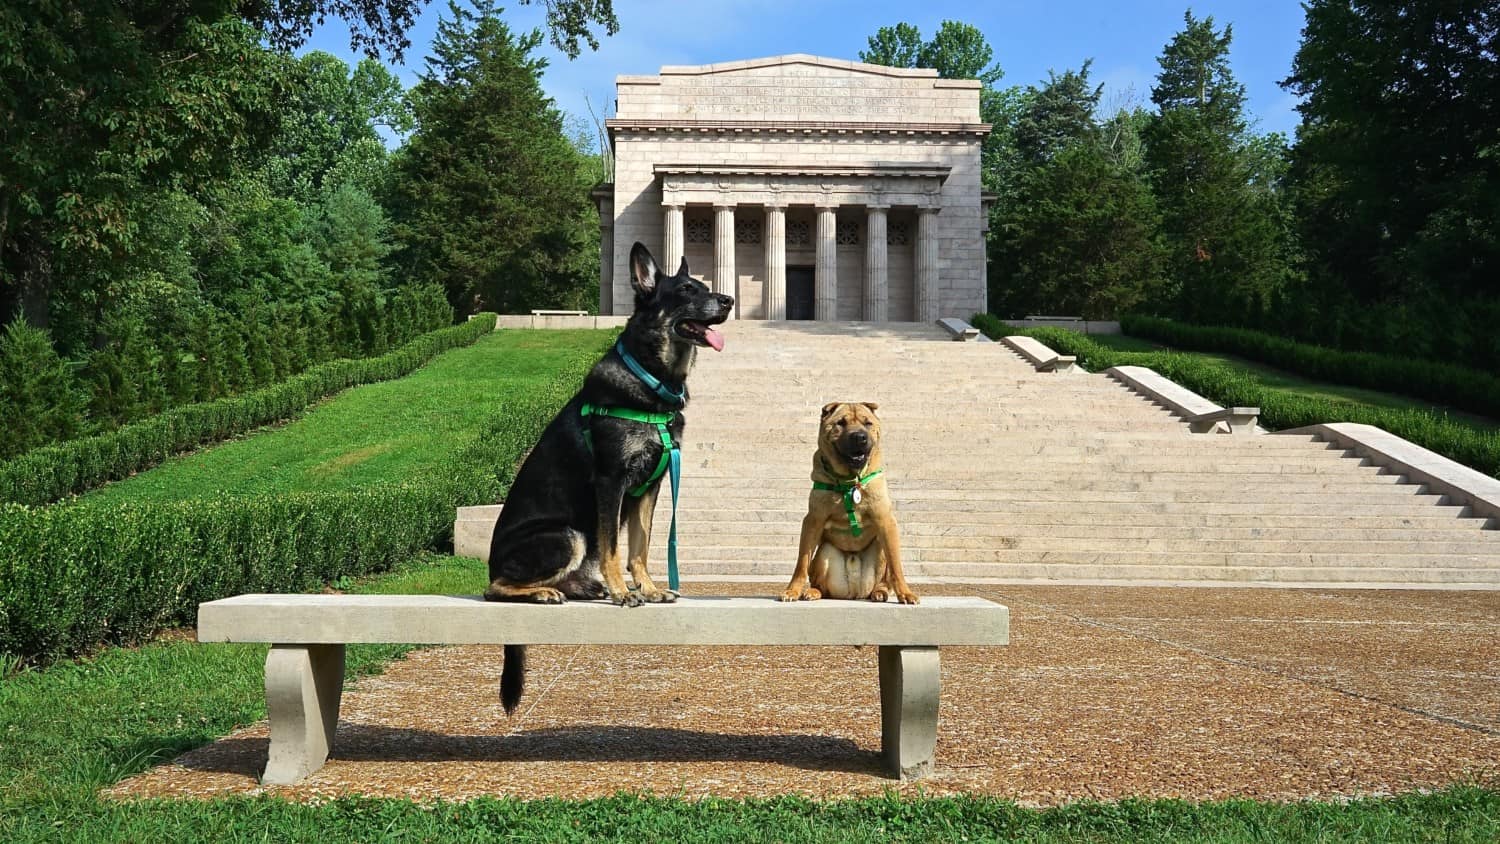 Kentucky's Top Pet Friendly Attraction: Lincoln Birthplace